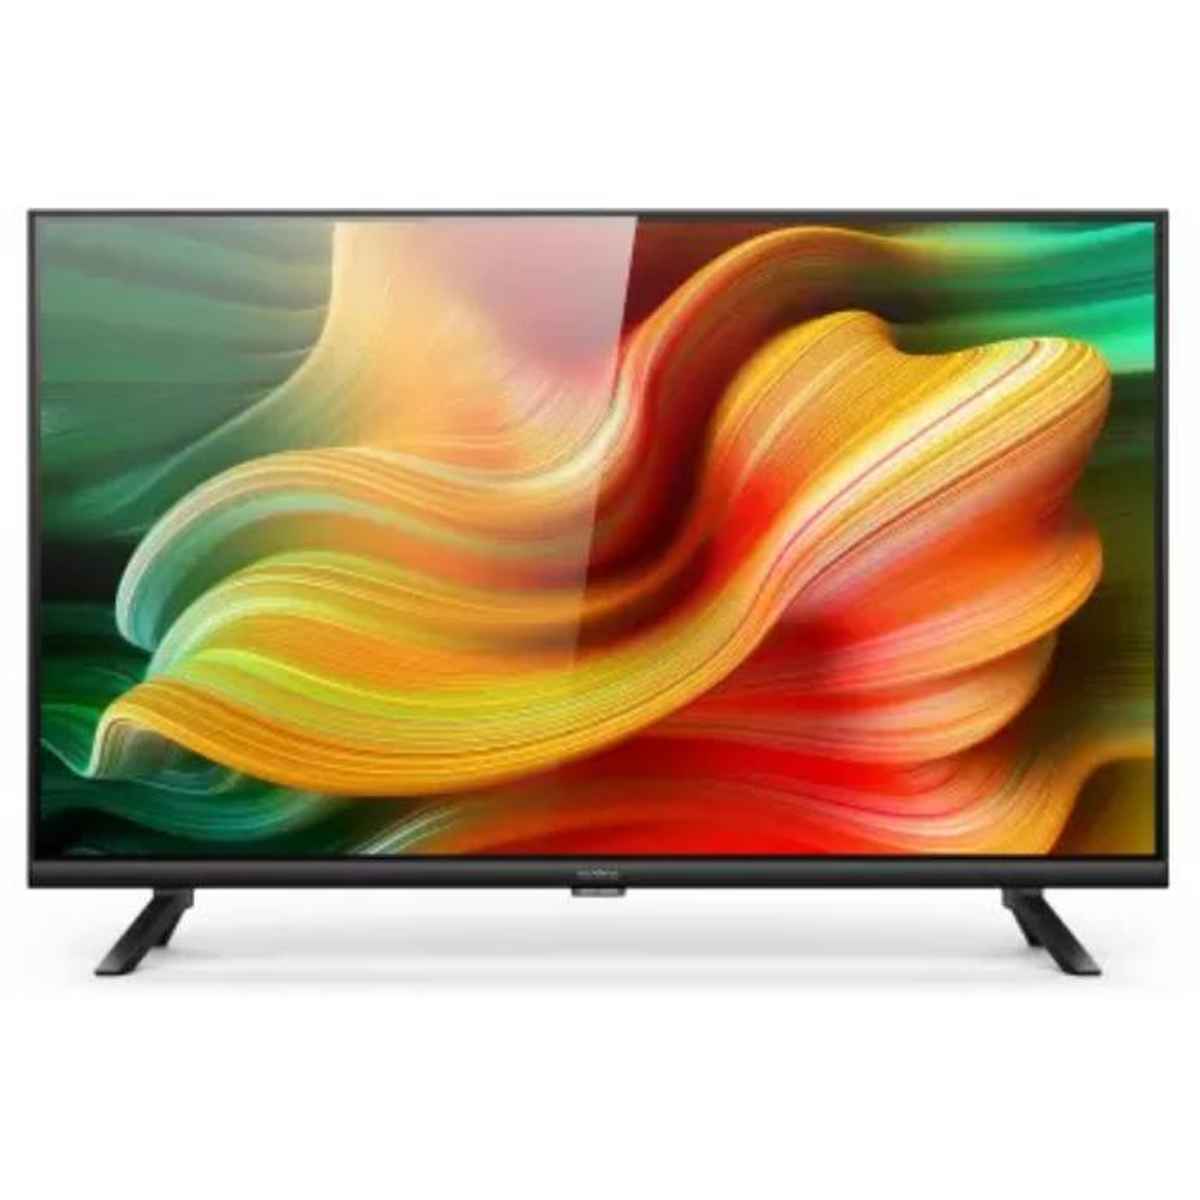 Realme 43 inch Full HD LED Smart Android TV (TV 43)